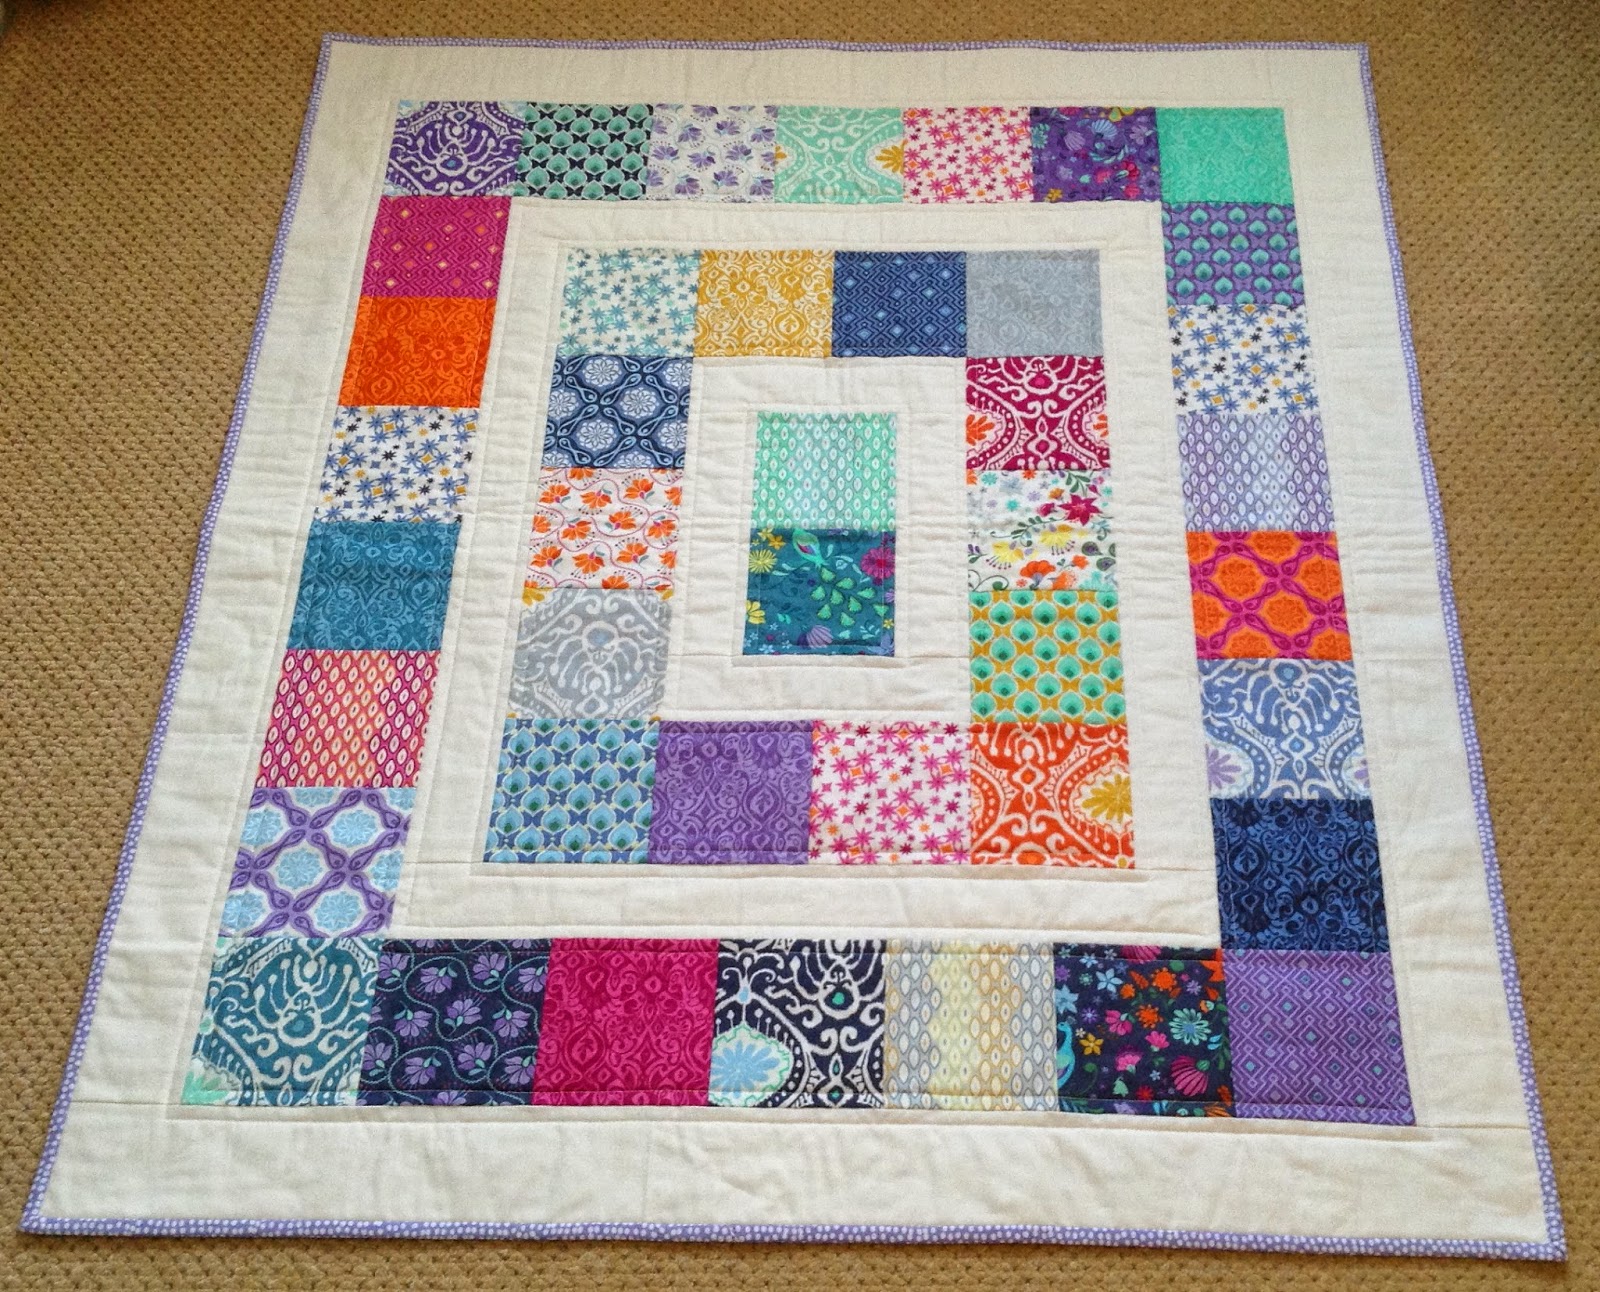 Sew Me Charm pack quilt